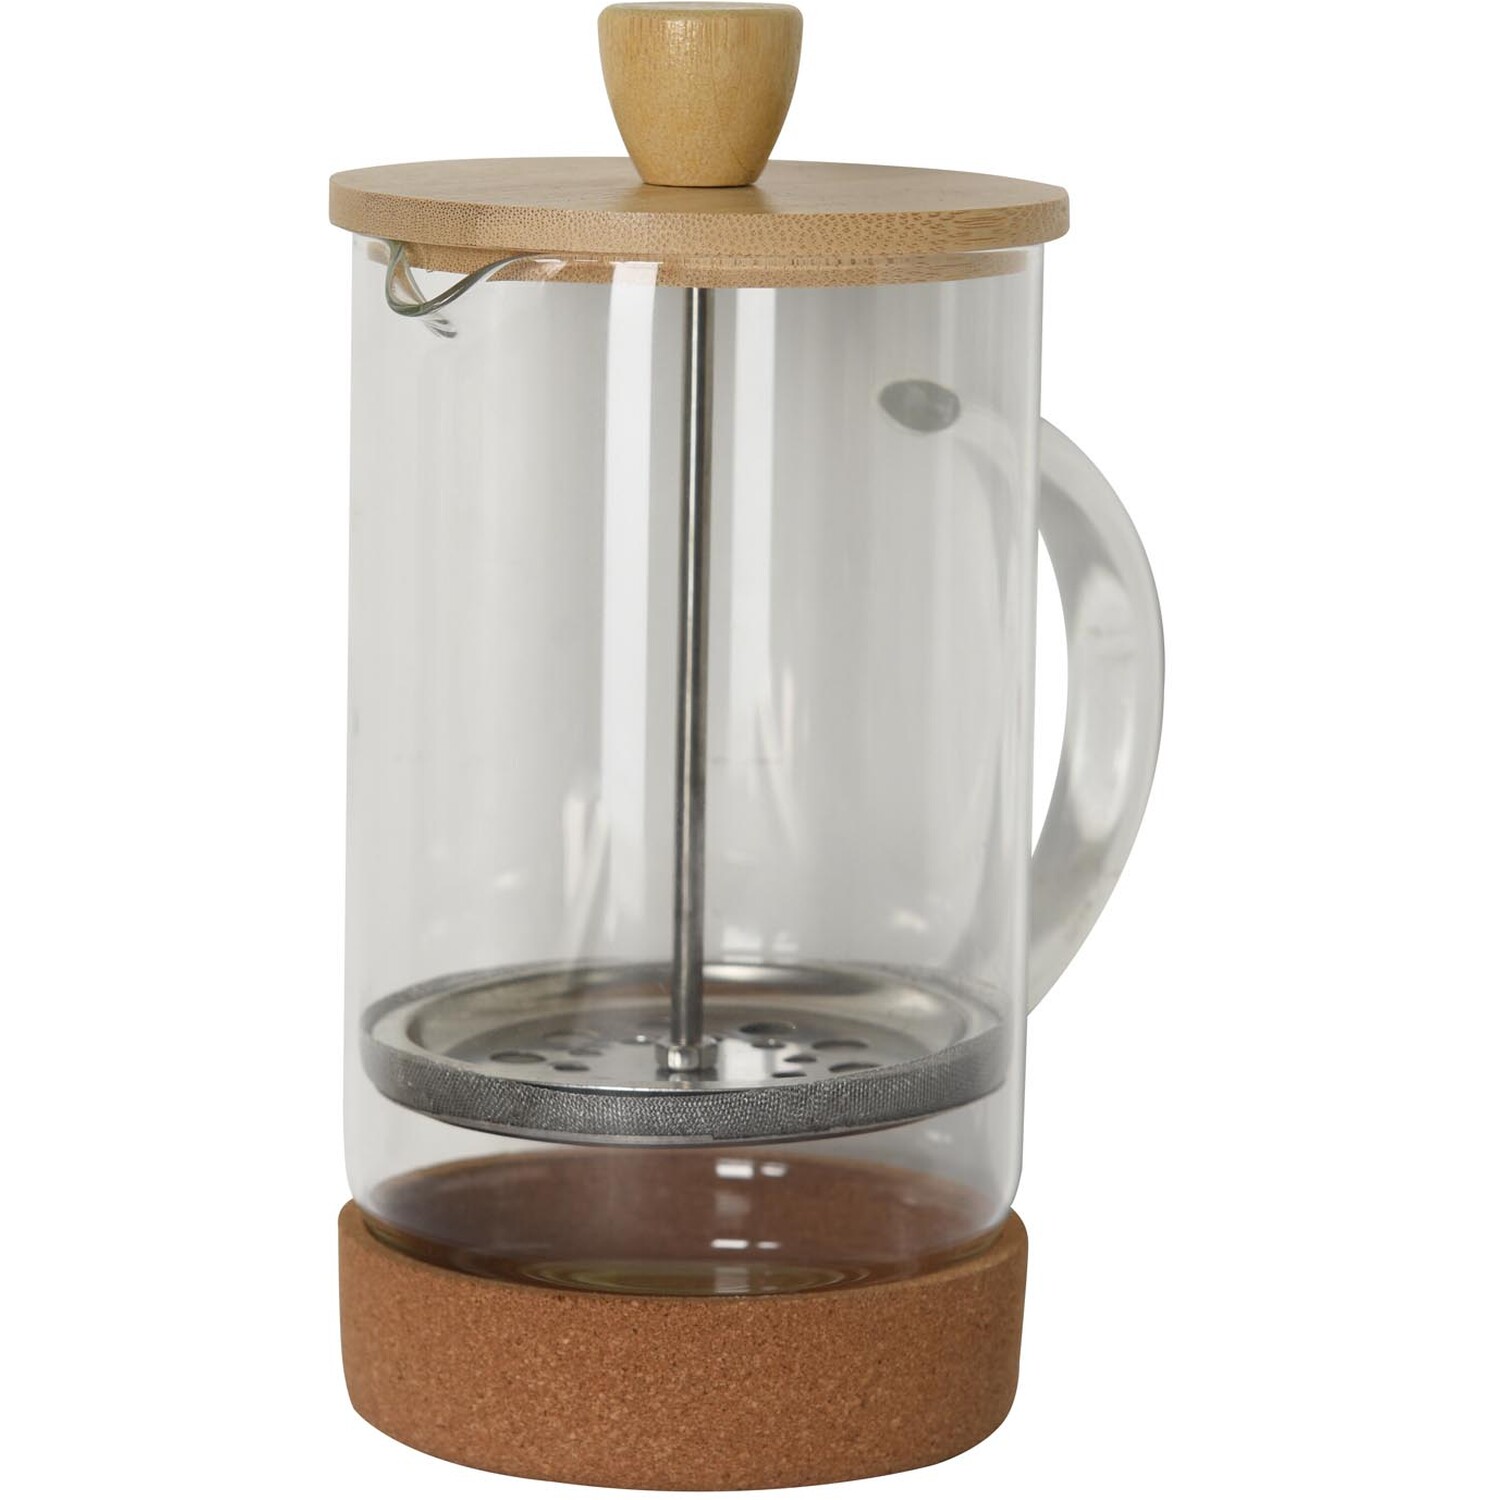 Bamboo Cafetiere - Natural Image 1